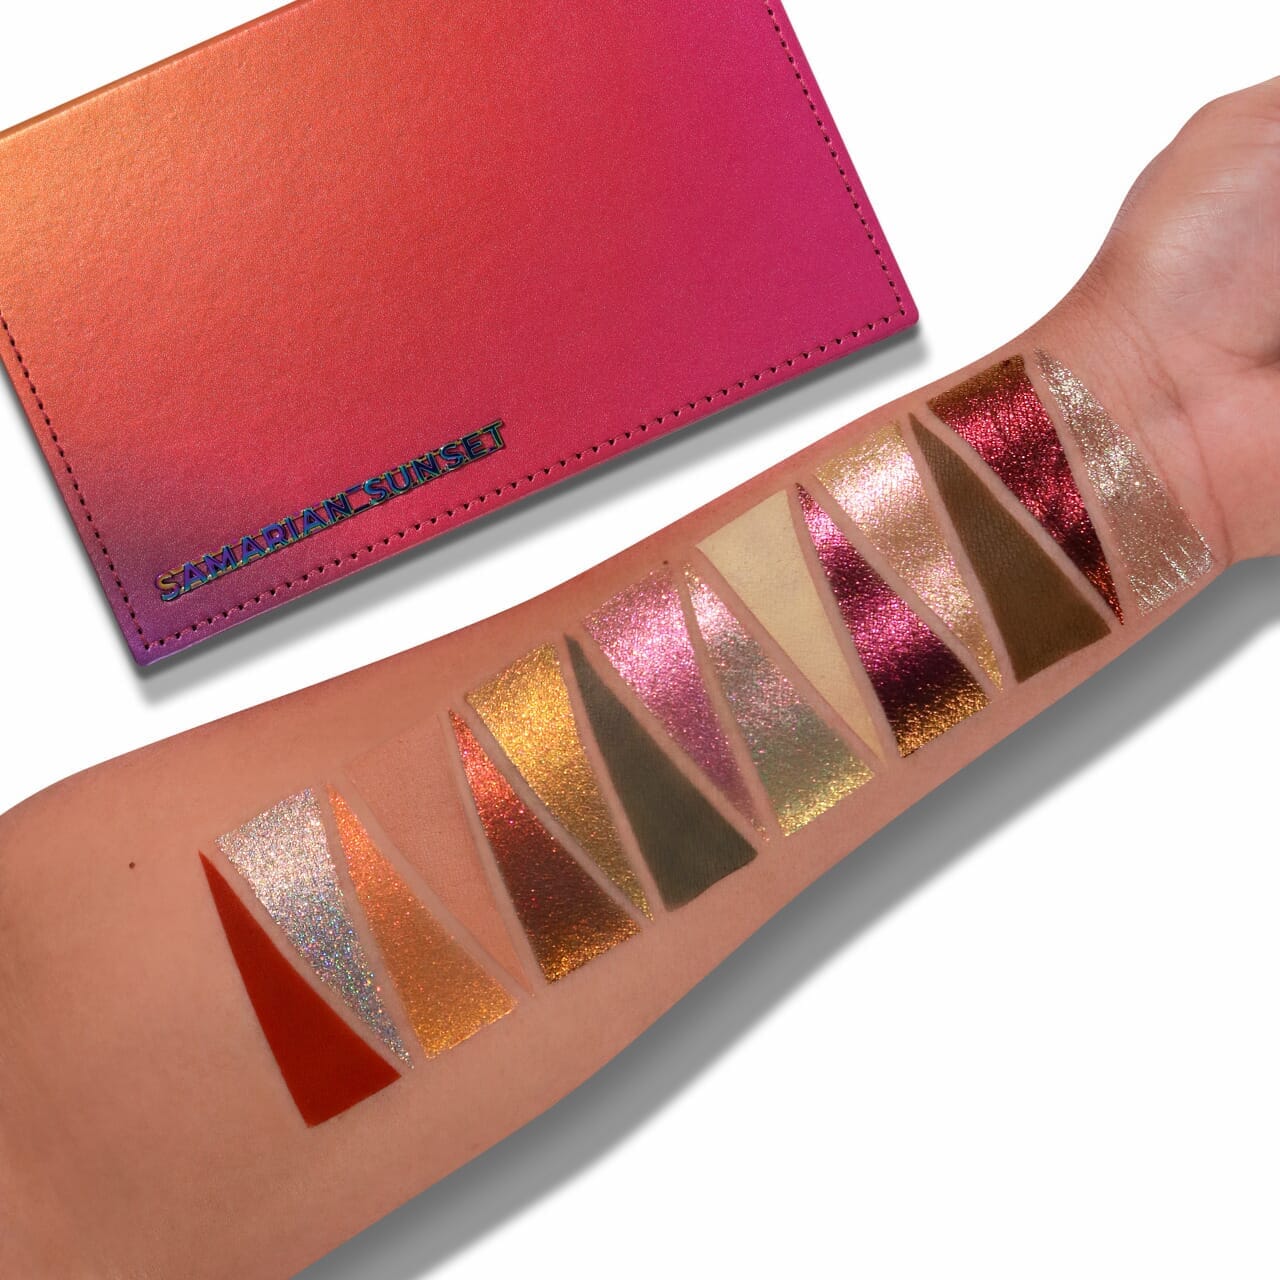 Samarian Sunset palette swatches by Adept Cosmetics